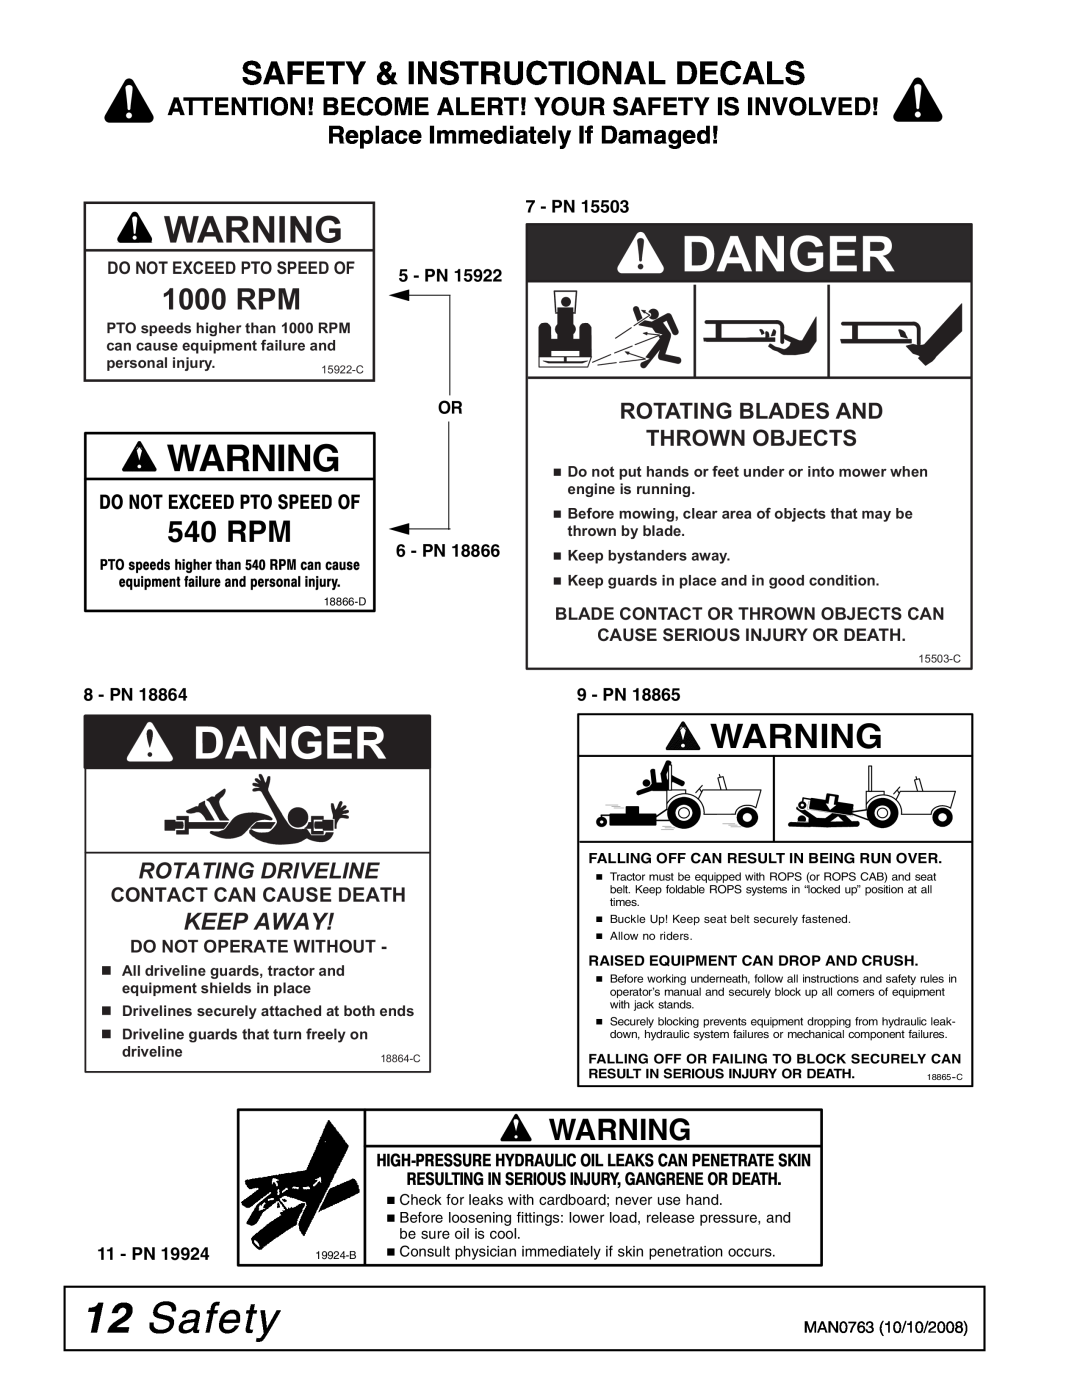 Woods Equipment BW240HDQ Danger, Safety & Instructional Decals, 1000 RPM, Replace Immediately If Damaged, Keep Away 